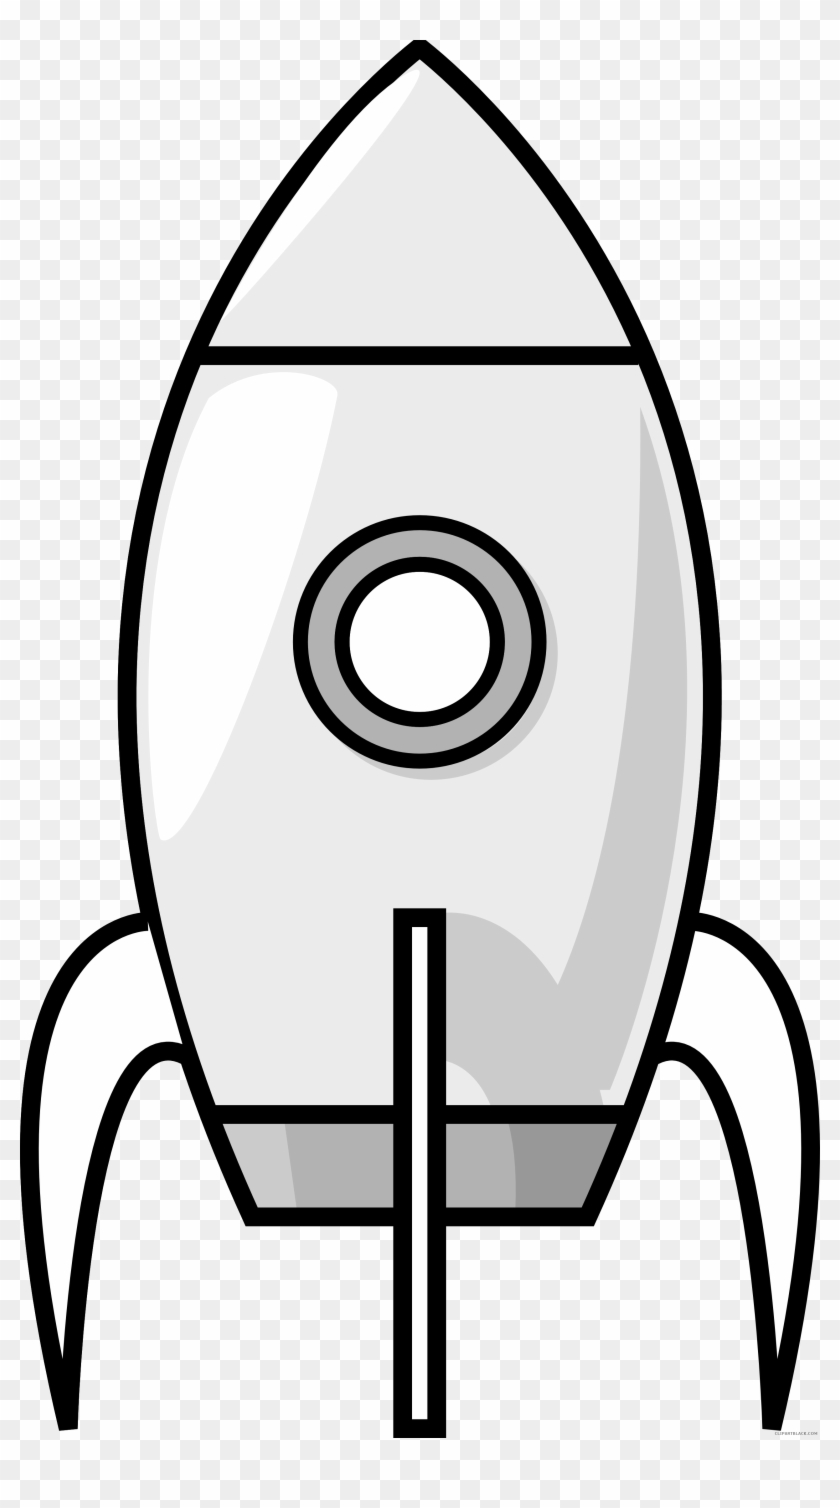 Lack And White Rocket Clip Art - Rocket Black And White #56541